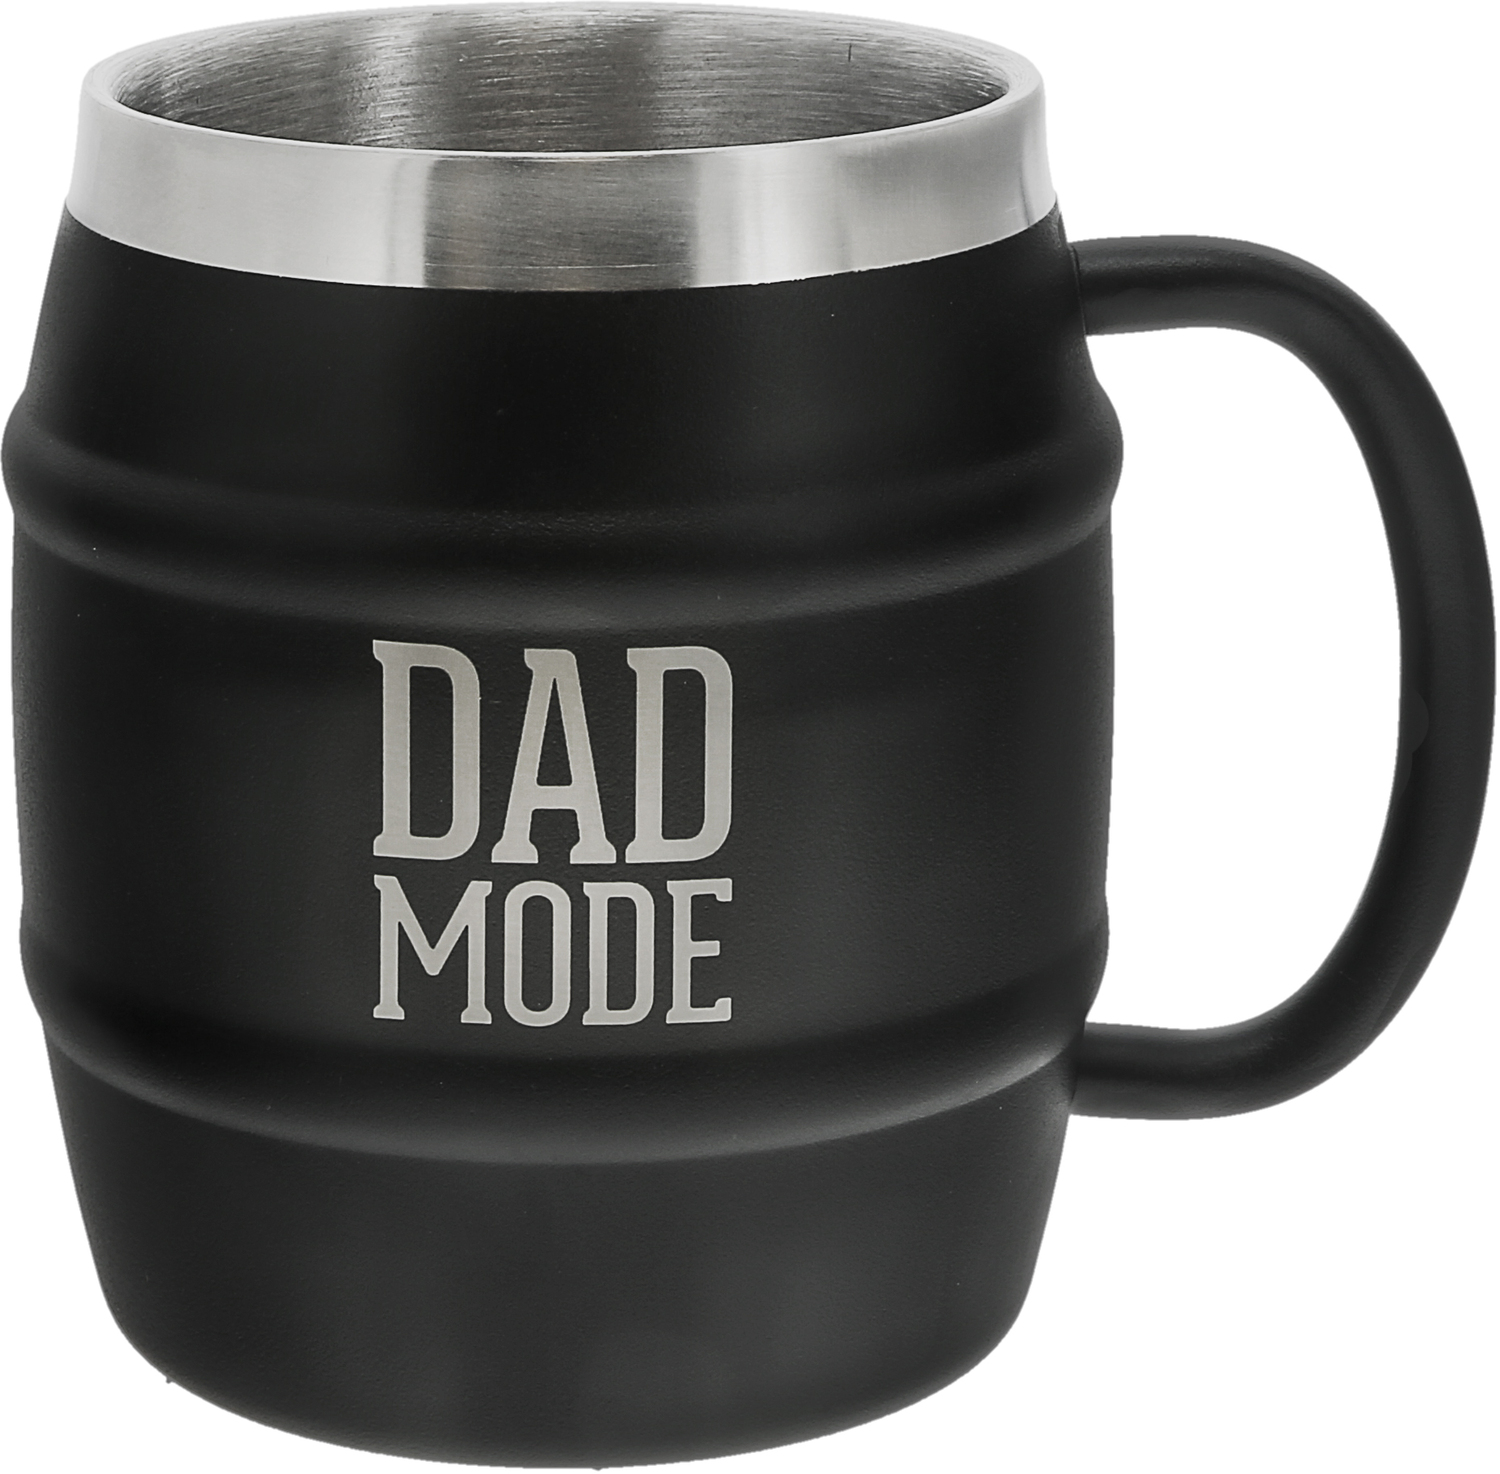 Dad Mode by We People - Dad Mode - 15 oz Stainless Steel Double Wall Stein